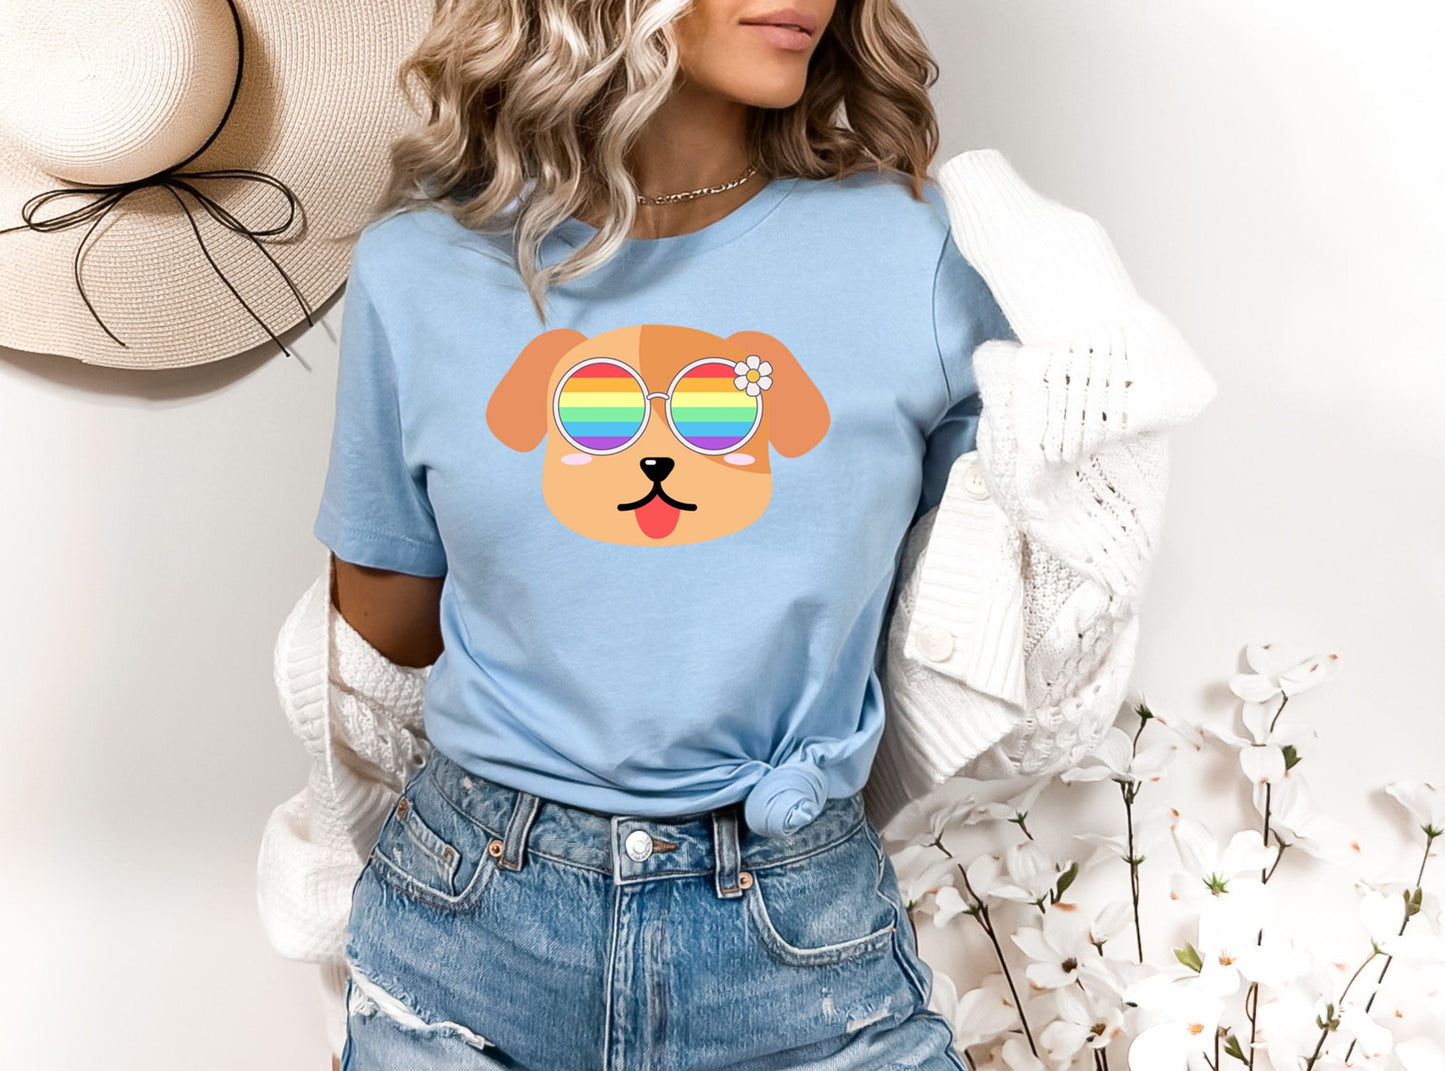 Super cute dog with rainbow glasses shirt blue hat, Rainbow glasses on an adorable dog, precious dog showing off pride. Beautiful pride dog